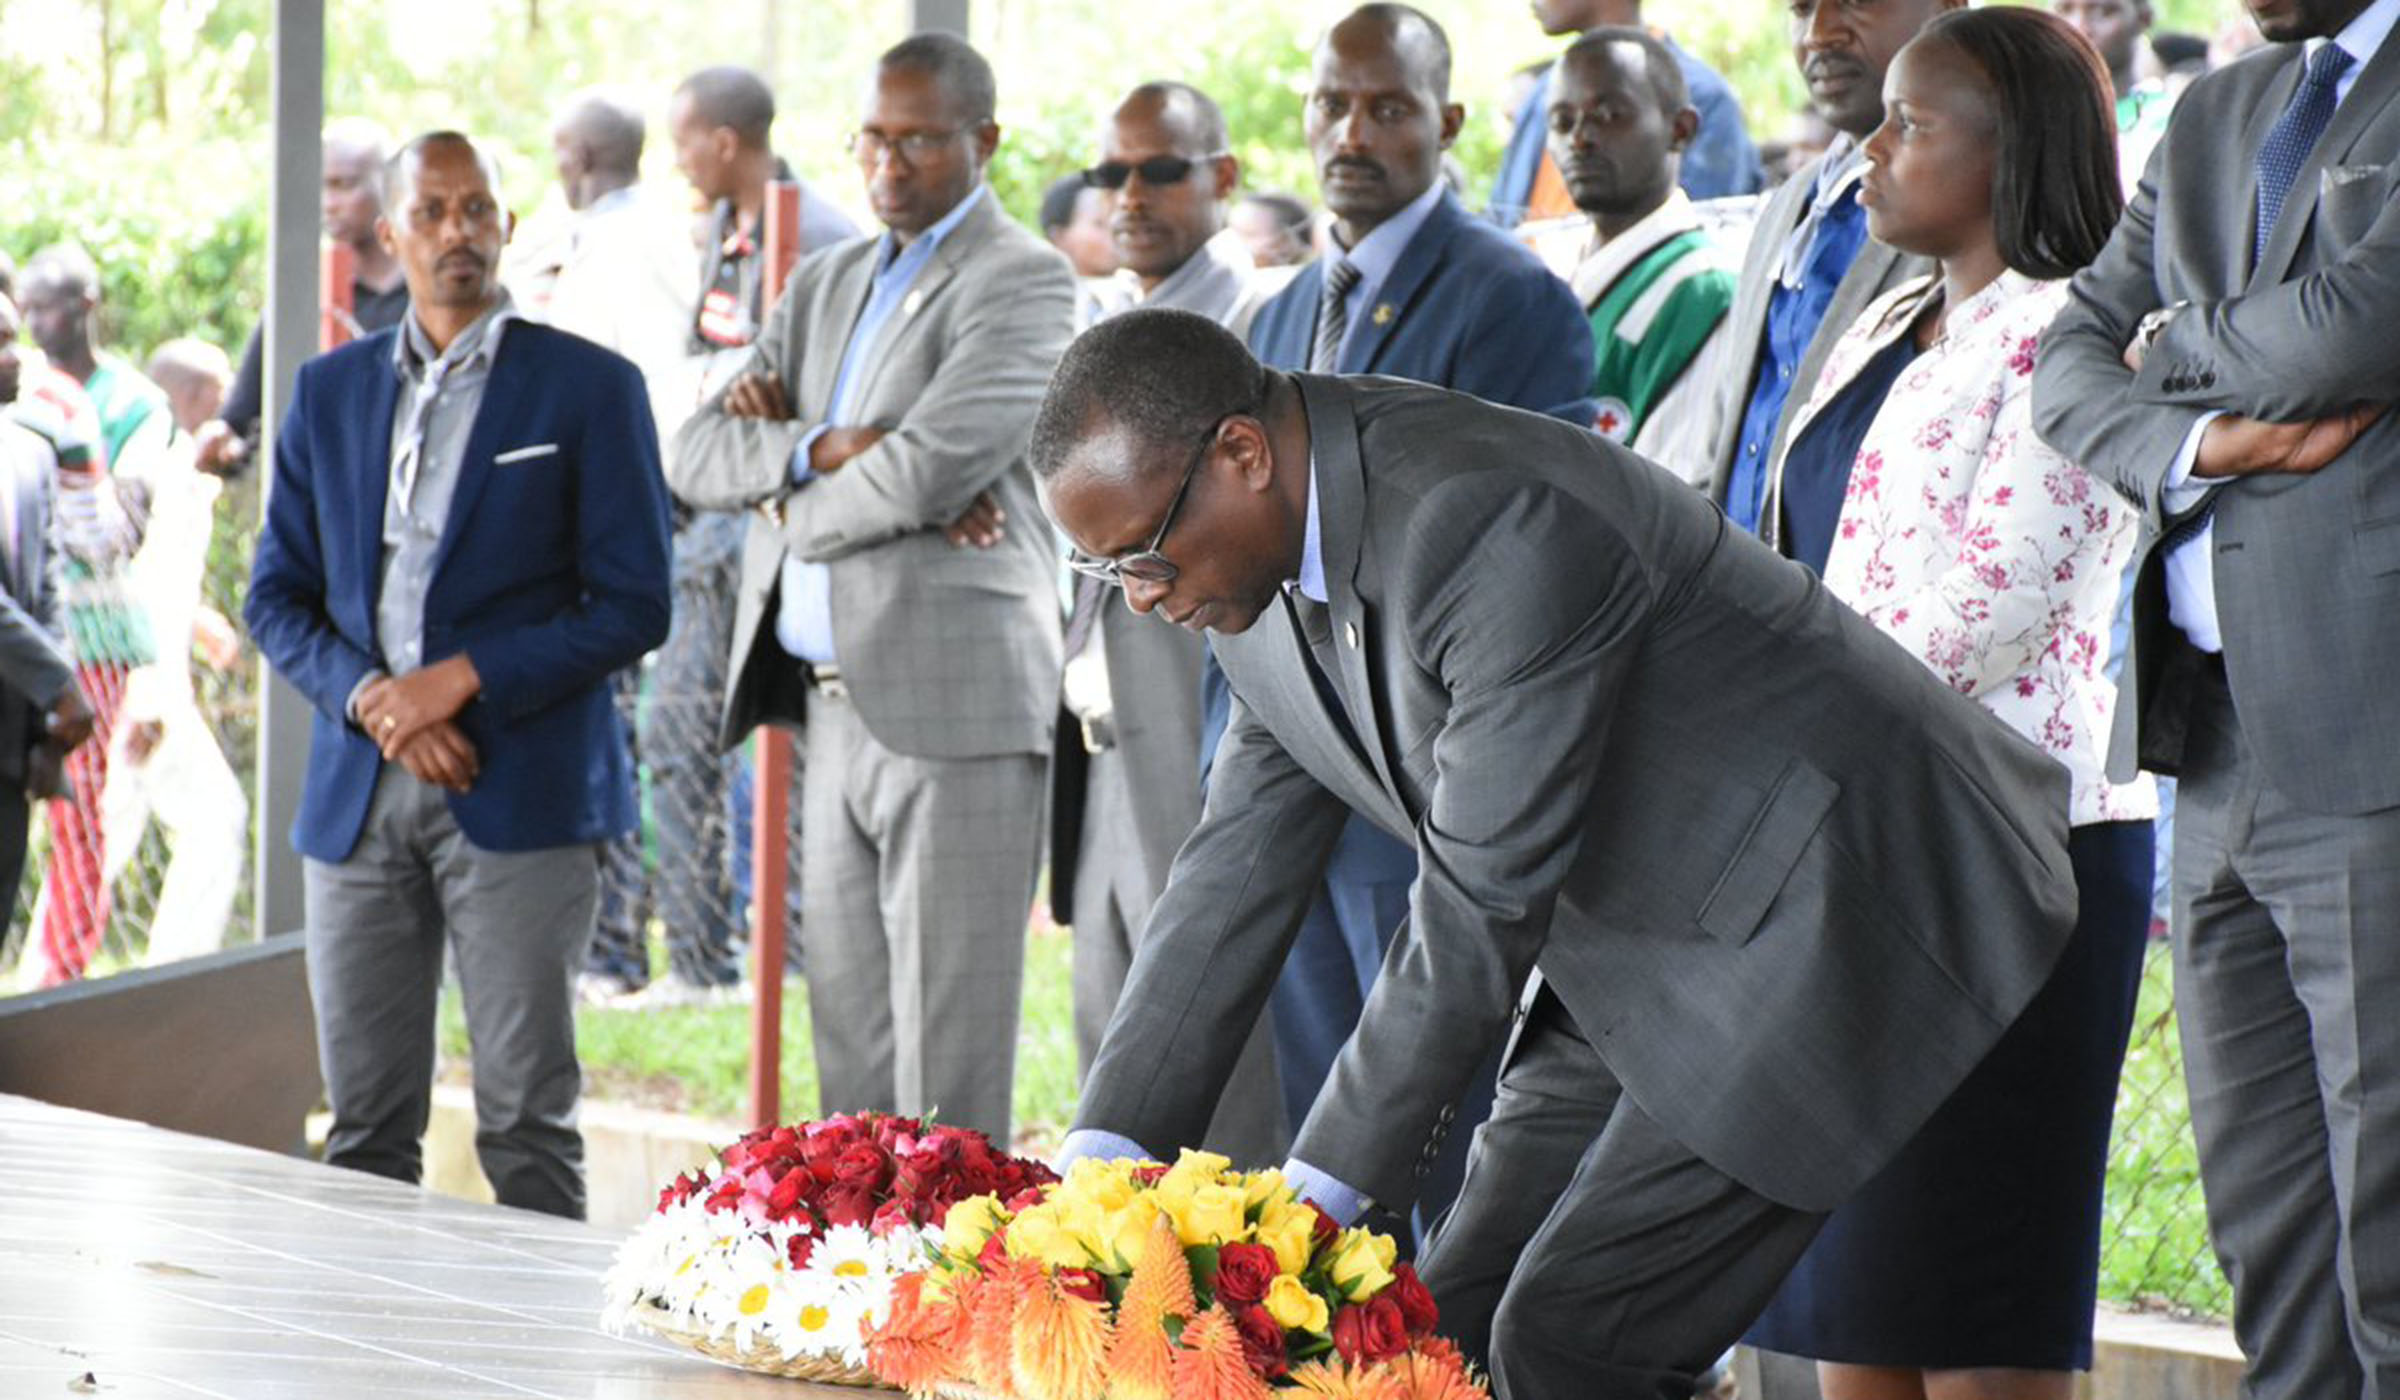 CNLG Executive Secretary Jean Damascu00e8ne Bizimana lays a wreath during the commemoration event at Mwulire Genocide Memorial in Rwamagana District on April 18, 2019. Courtesy.